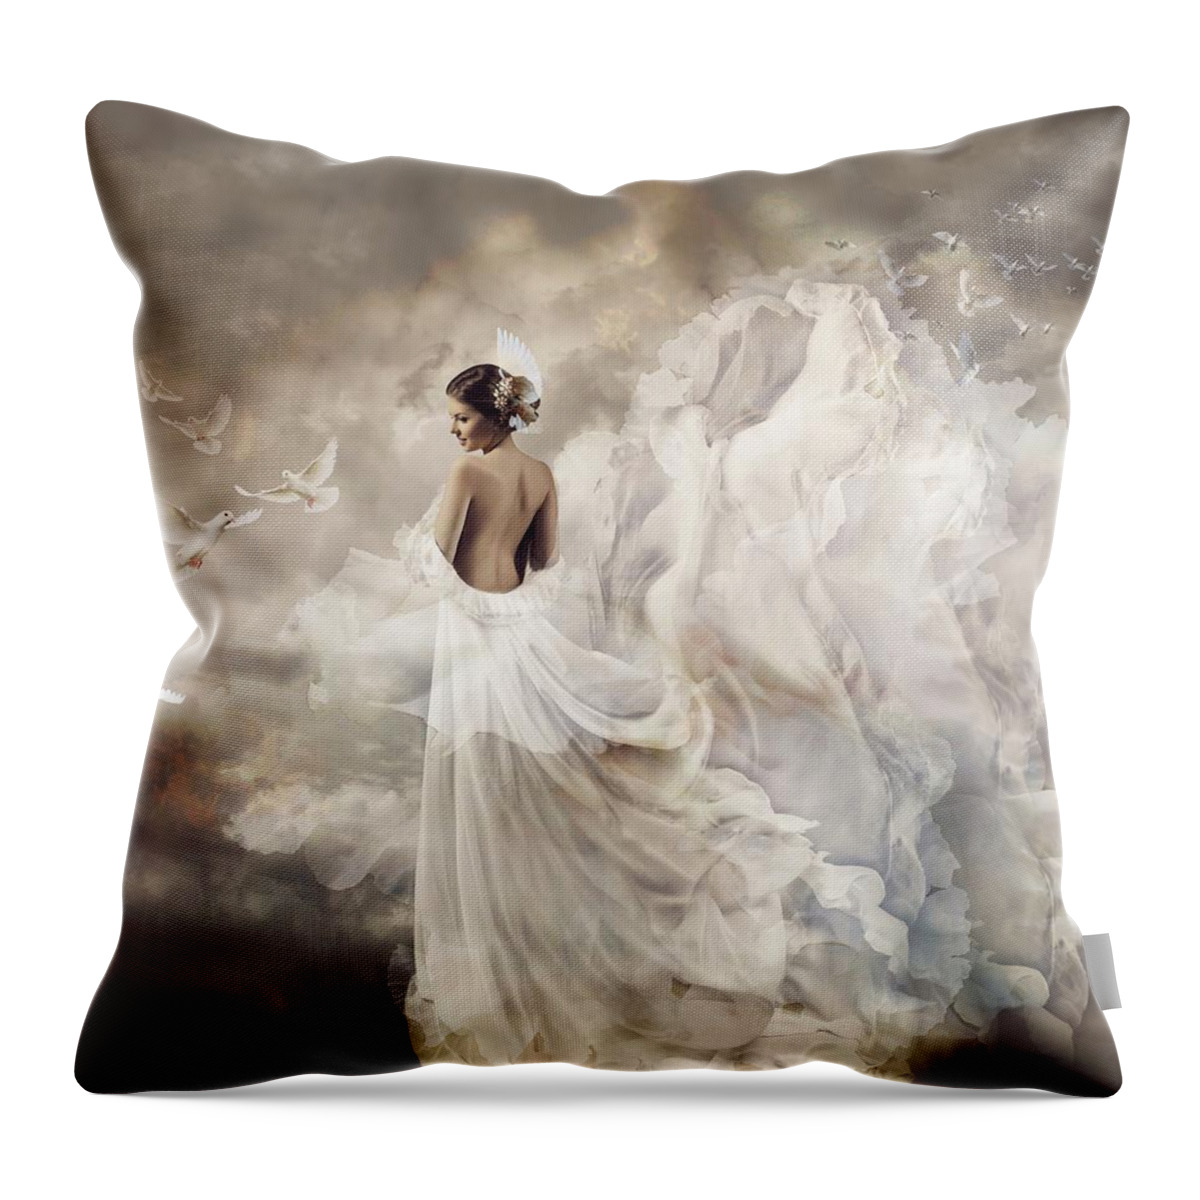 Nymph Throw Pillow featuring the digital art Nymph of the sky by Lilia D